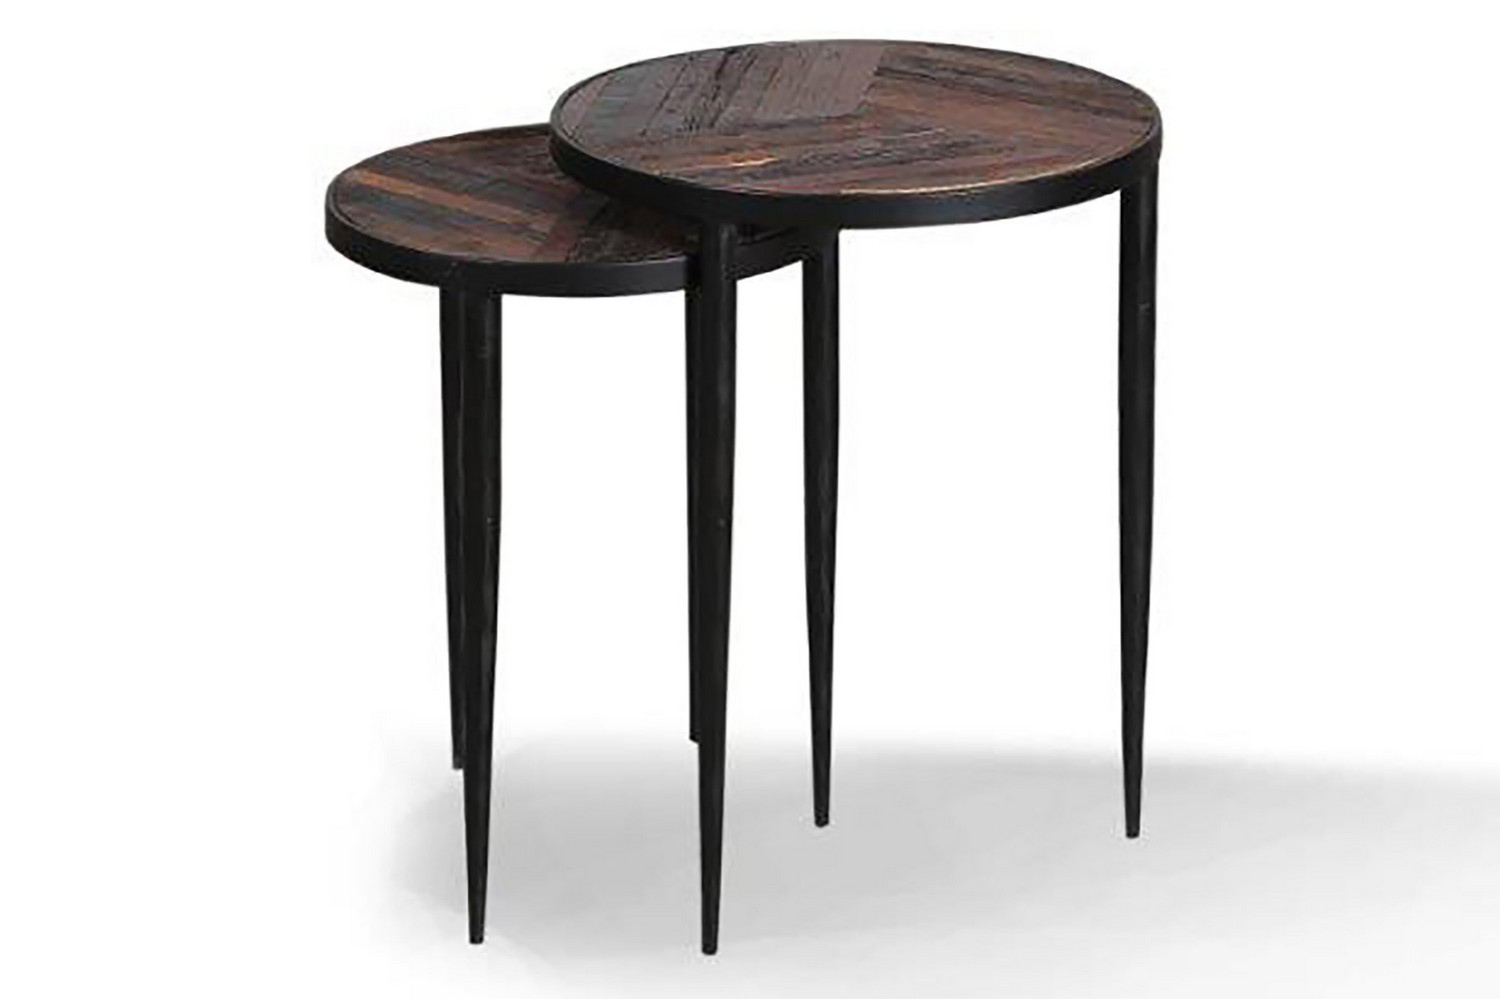 Parker House Crossings The Underground Round Chairside Nesting Table - Reclaimed Rustic Brown